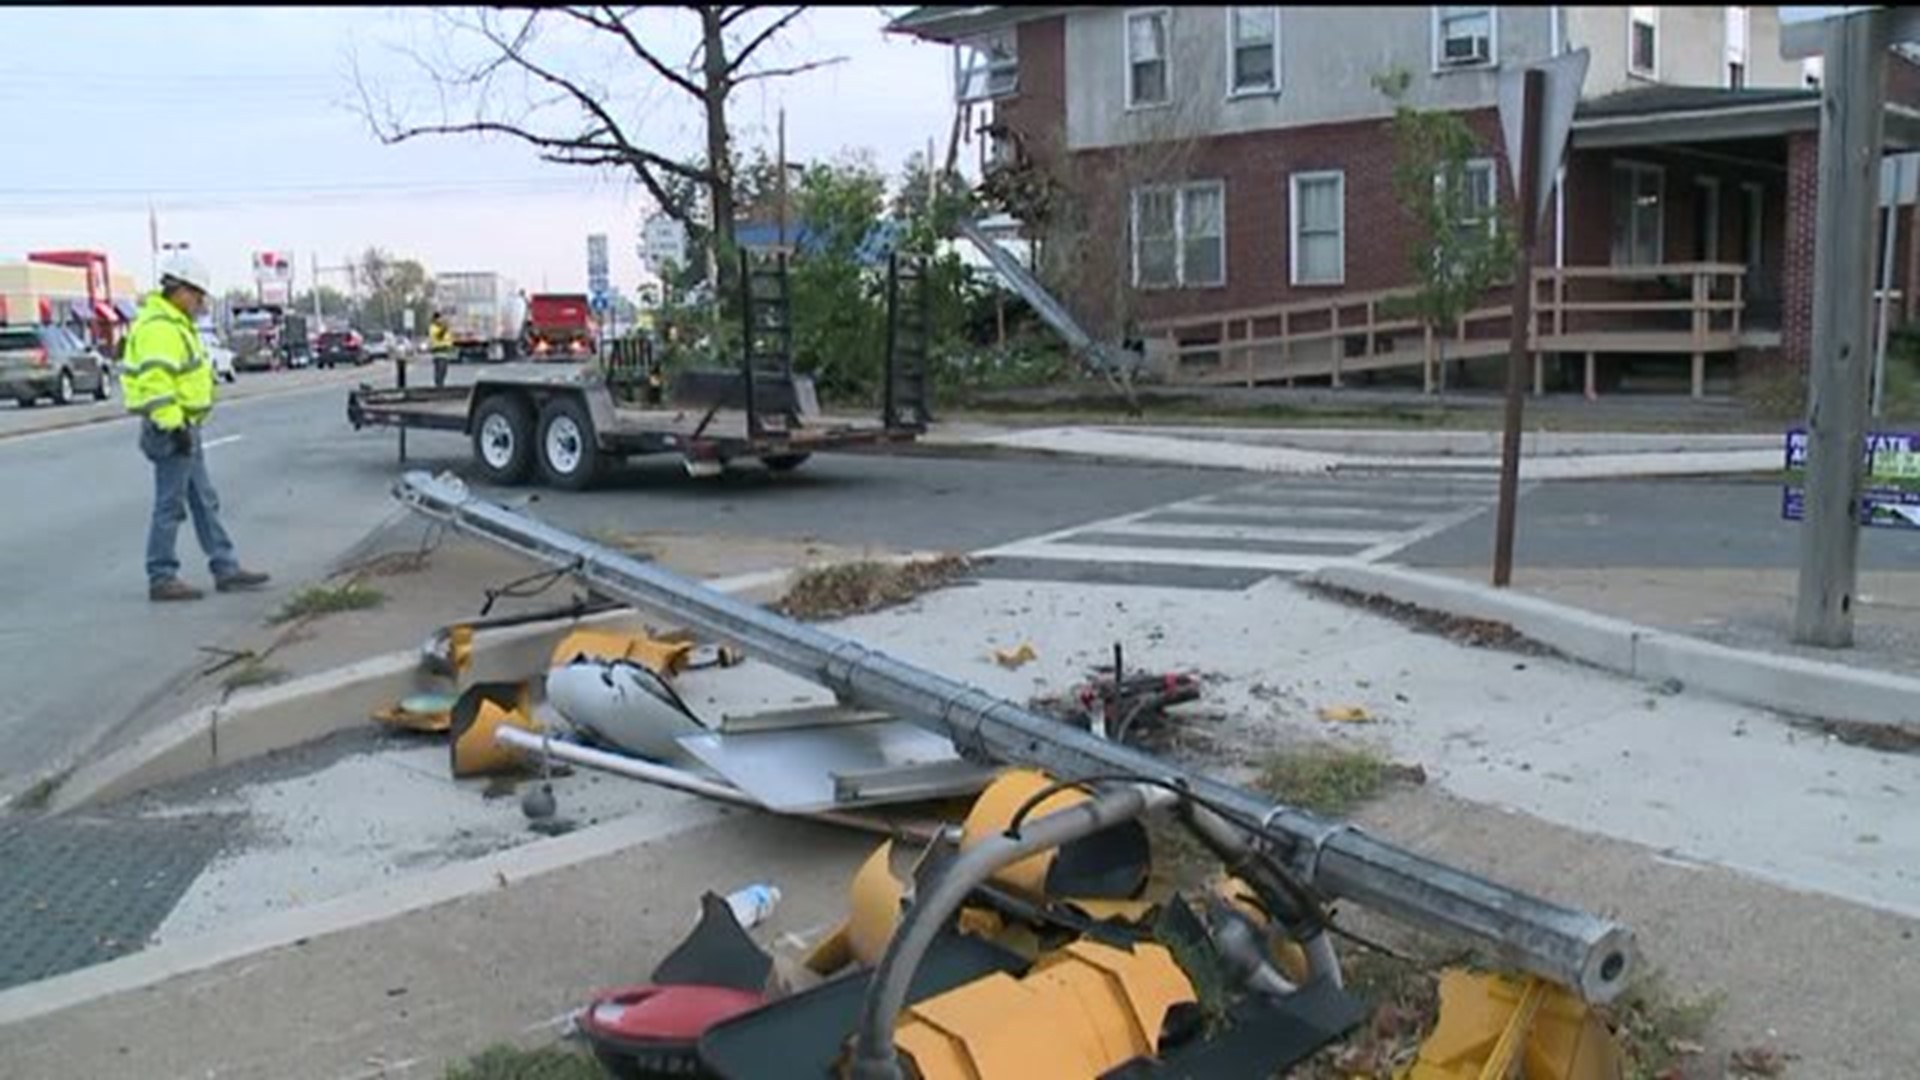 Tractor Trailer Crashes into Traffic Signal, Building